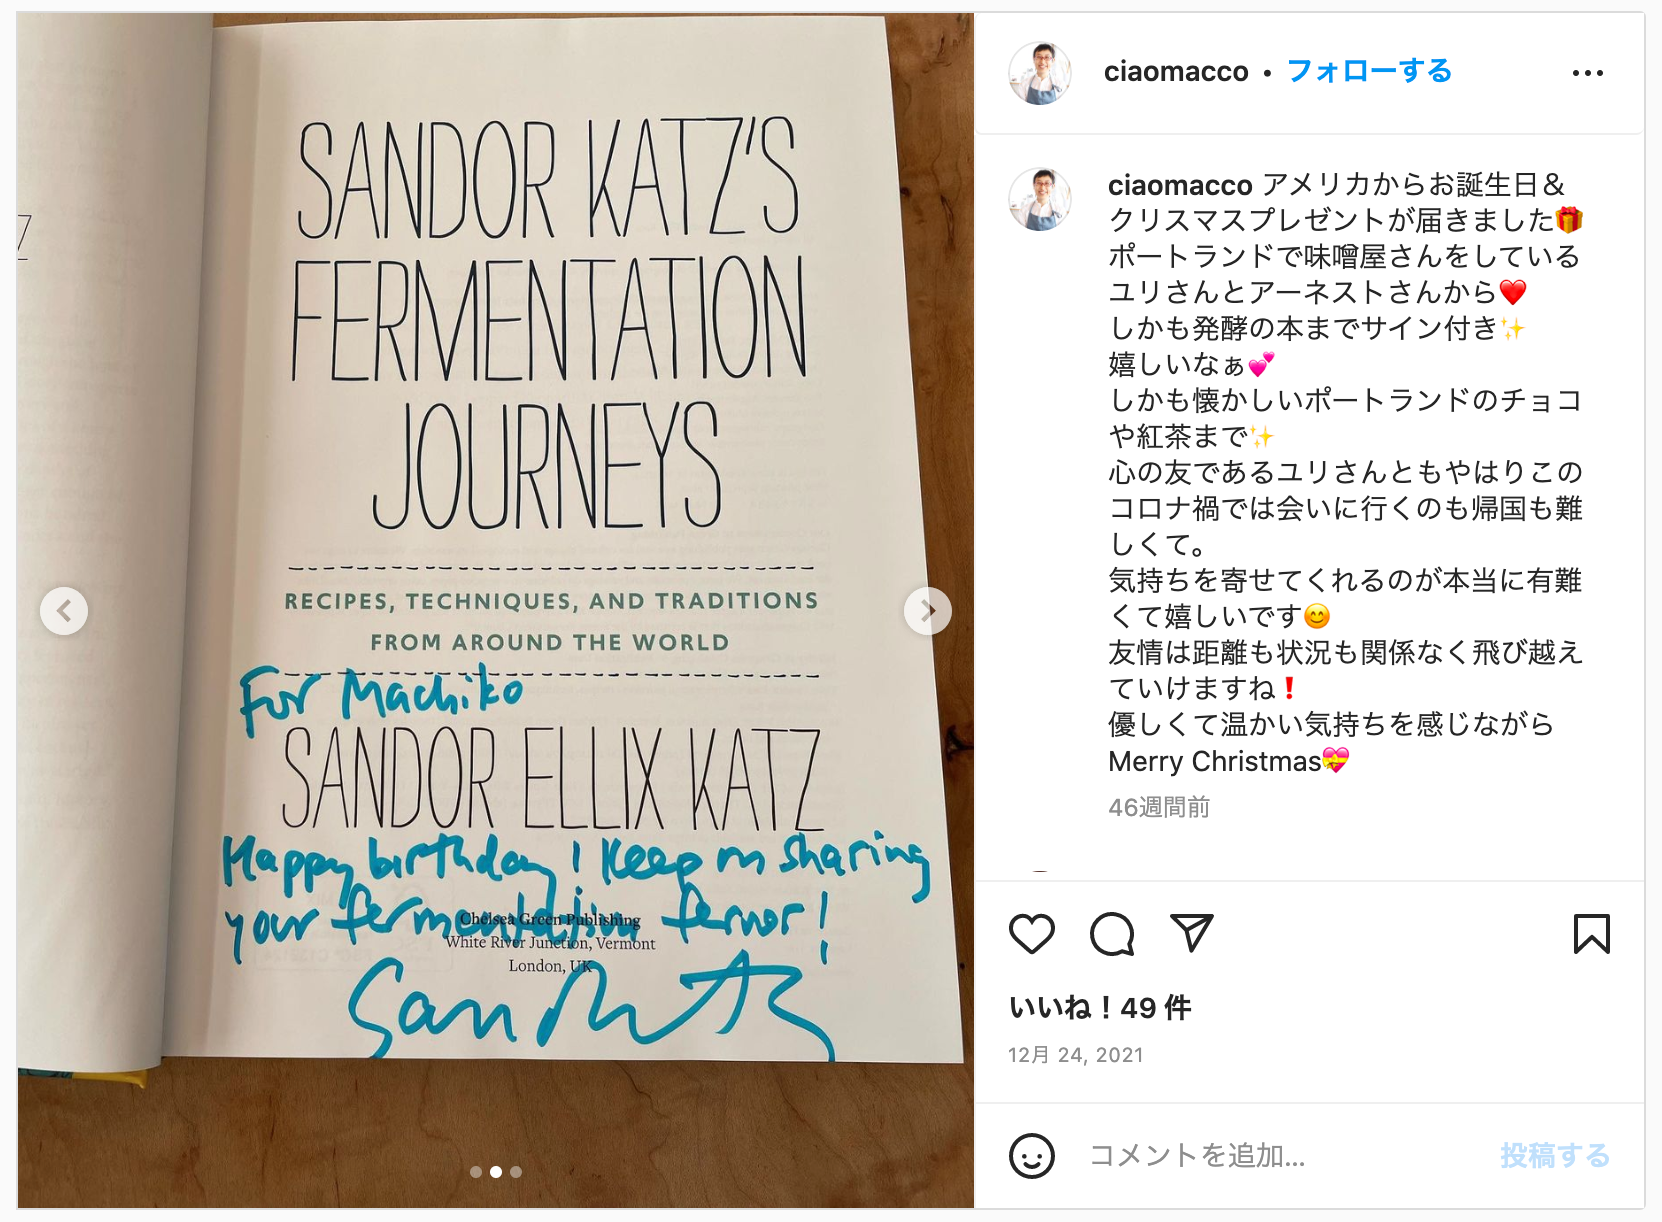 A book with a message from Sandor Ellix Katz presented to Tateno by the owner and his wife of Jorinji Miso
Machiko Tateno official Instagram (@ciaomacco)